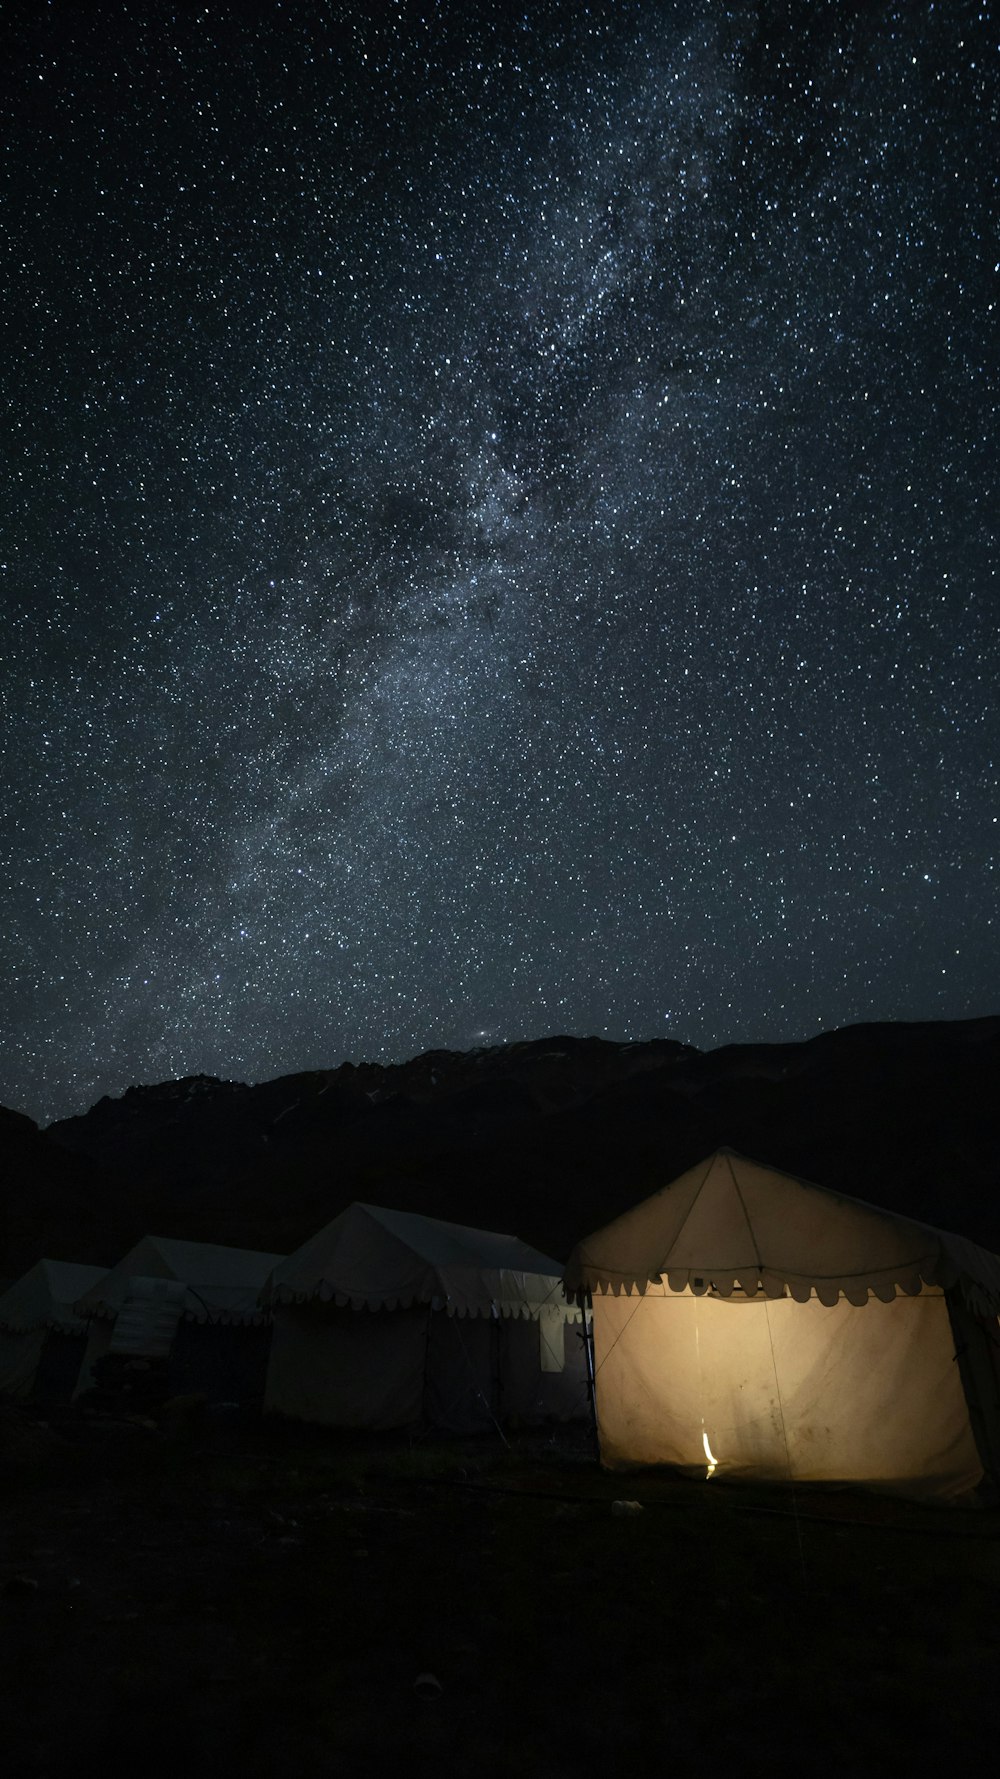 a group of tents under a night sky filled with stars